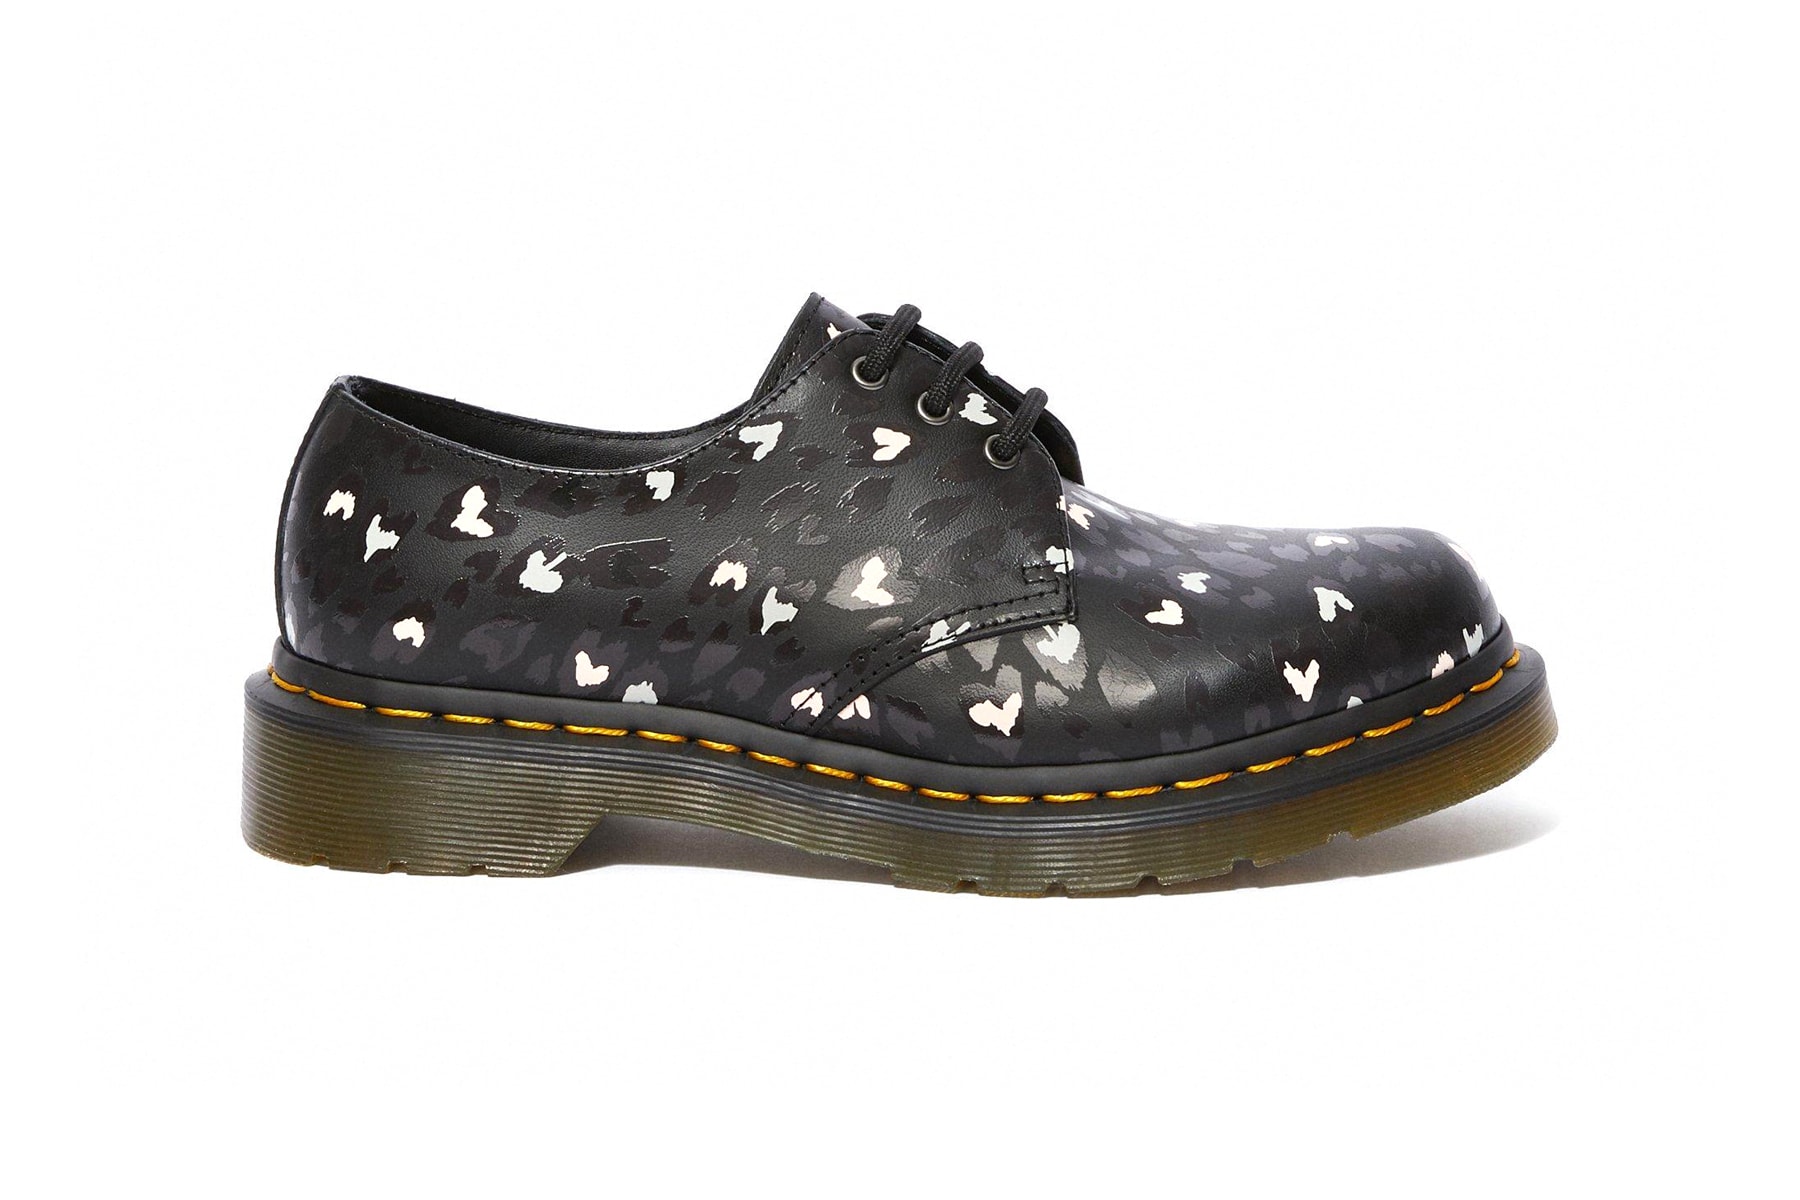 Dr. Martens Valentine's Day Collection 1460 1461 boots hearts release information wild hearts black and white print hearts